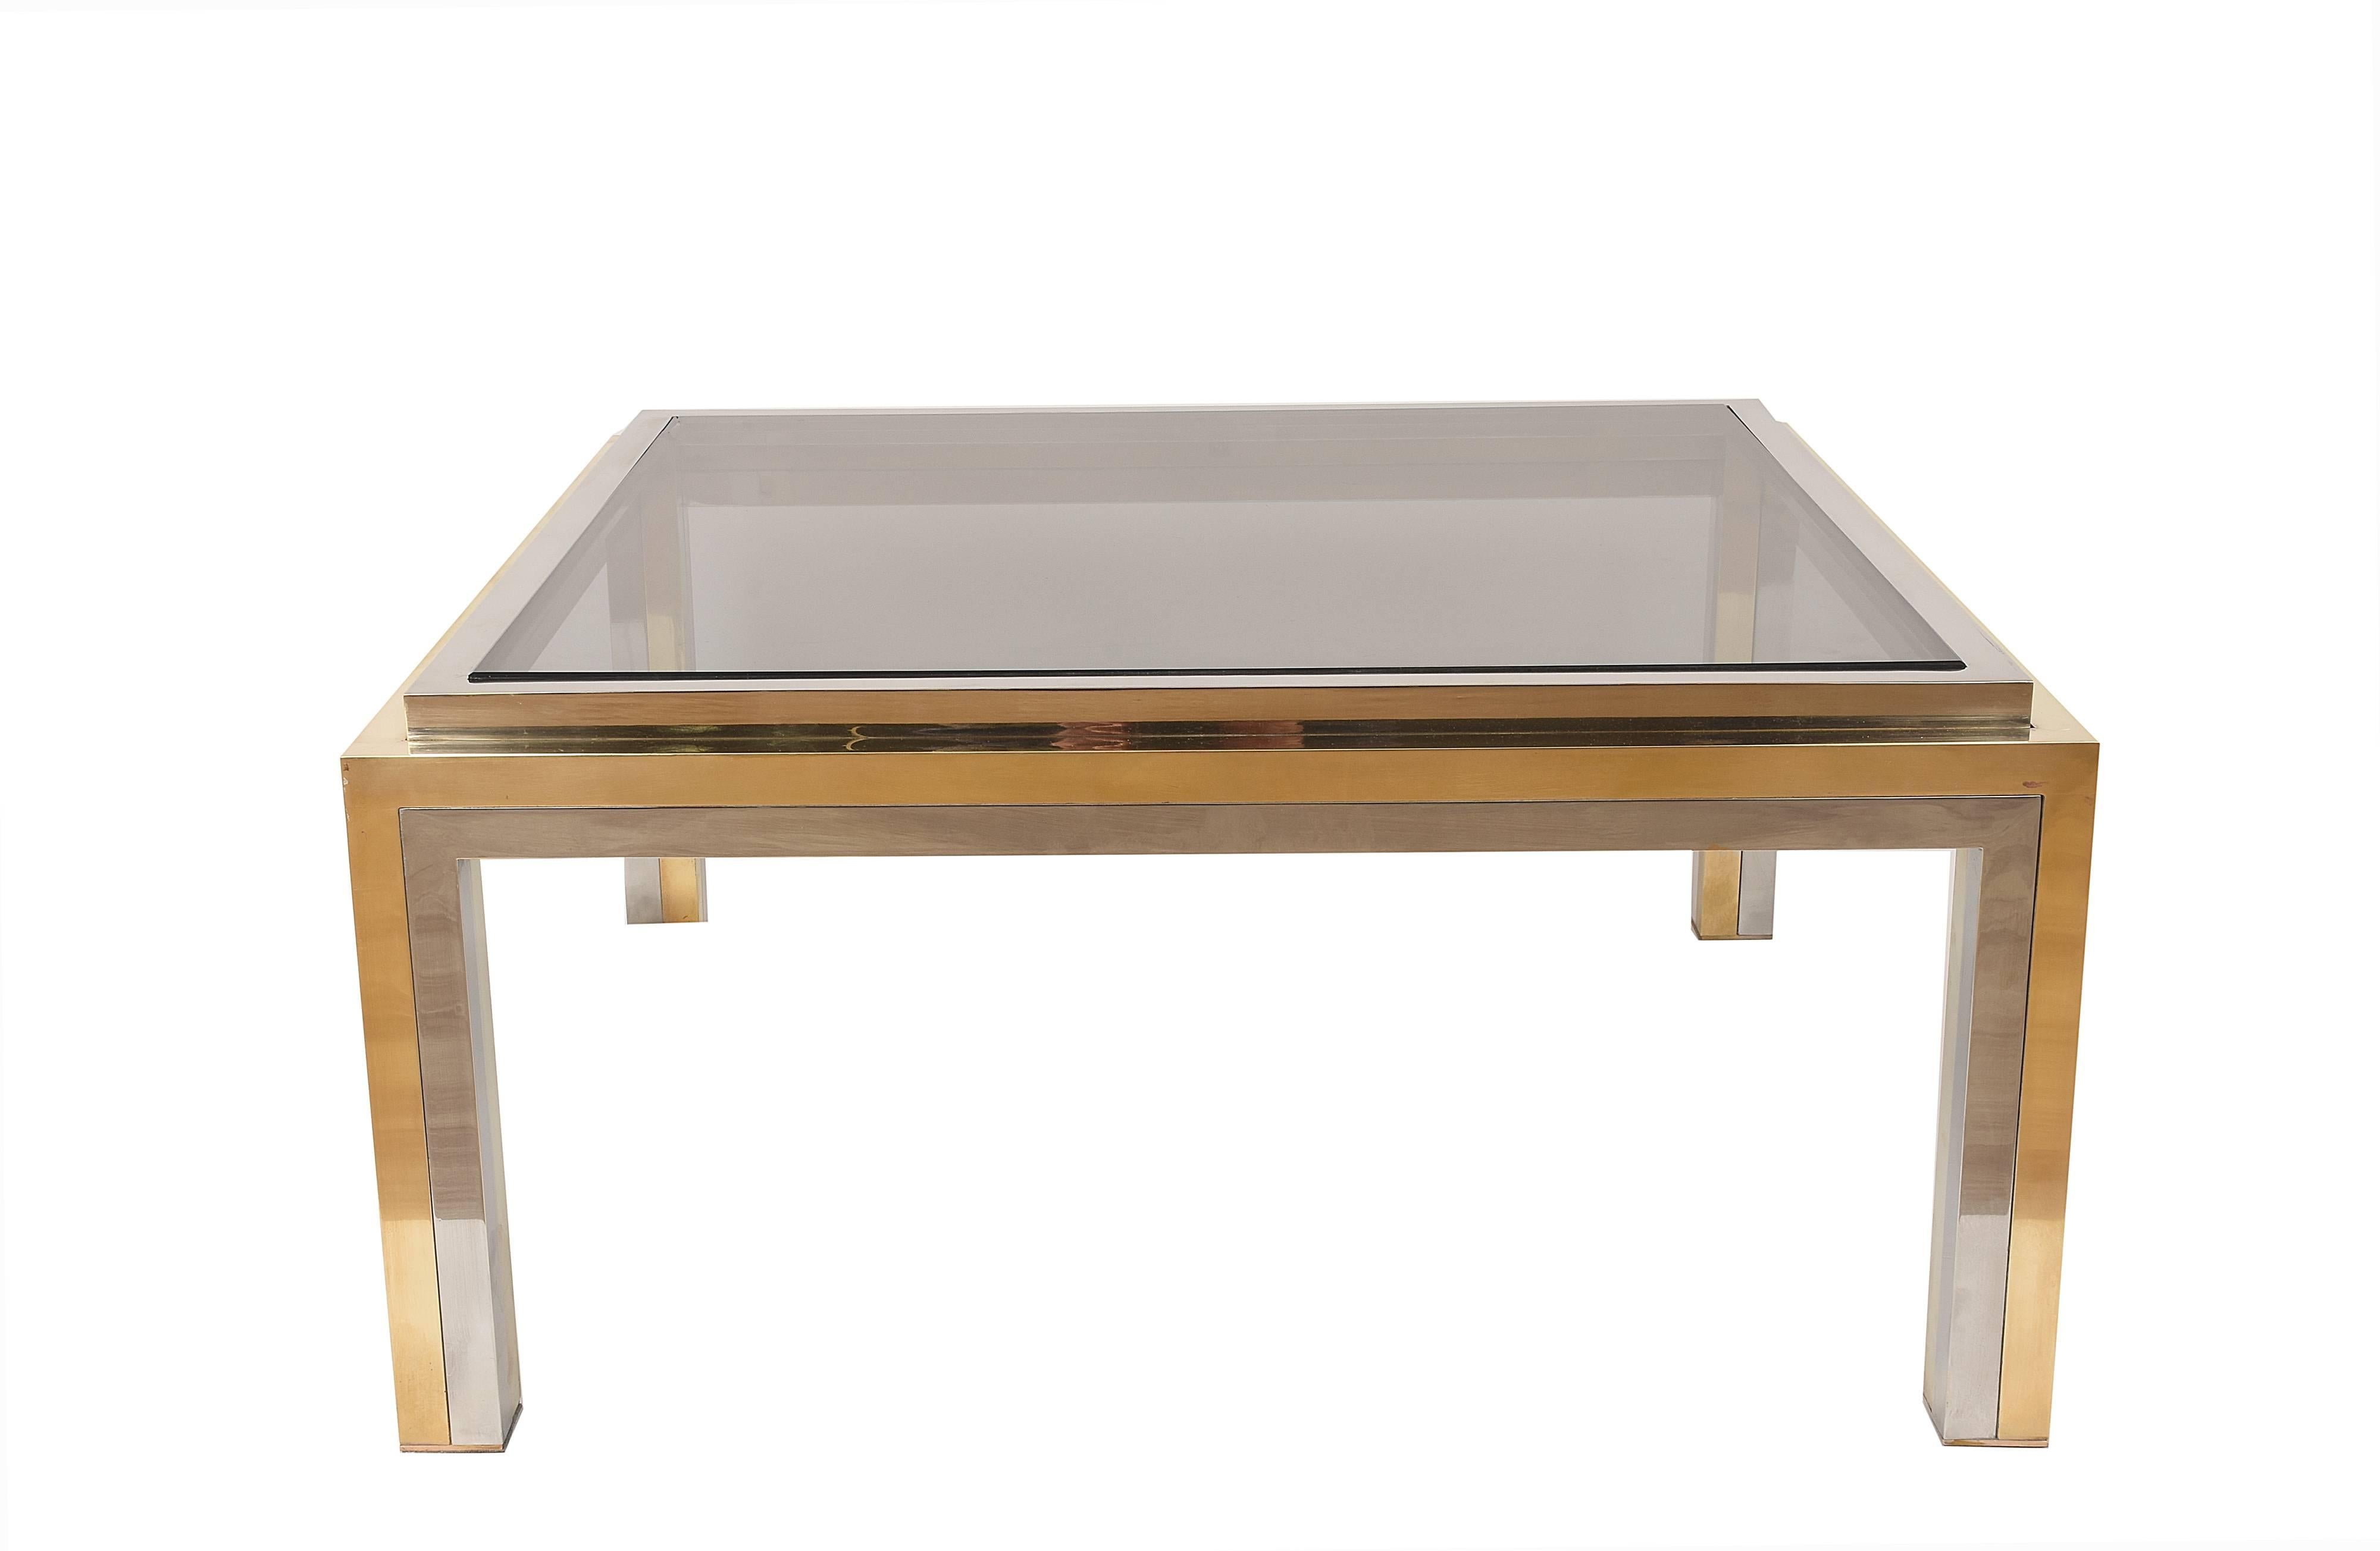 Late 20th Century Midcentury Rega Smoked Glass, Brass and Chrome Square Coffee Table, Italy 1970s For Sale